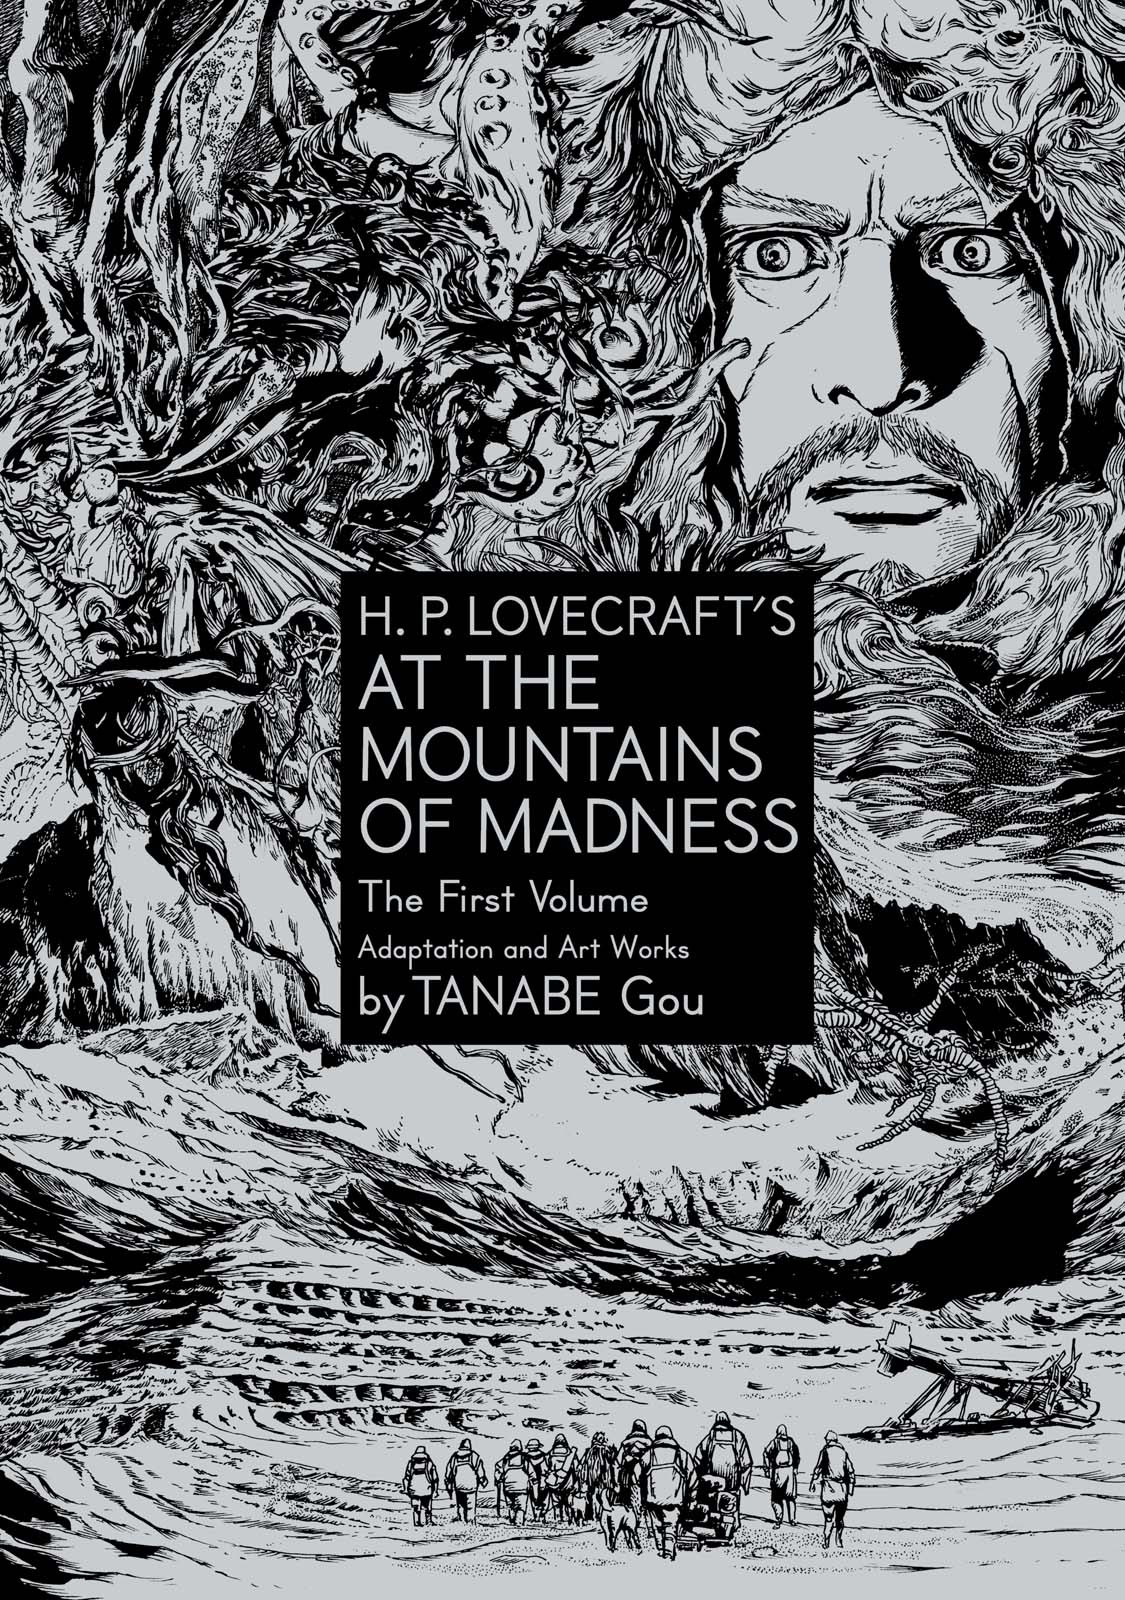 H. P. Lovecraft's At the Mountains of Madness Vol. 1 Ch. 0